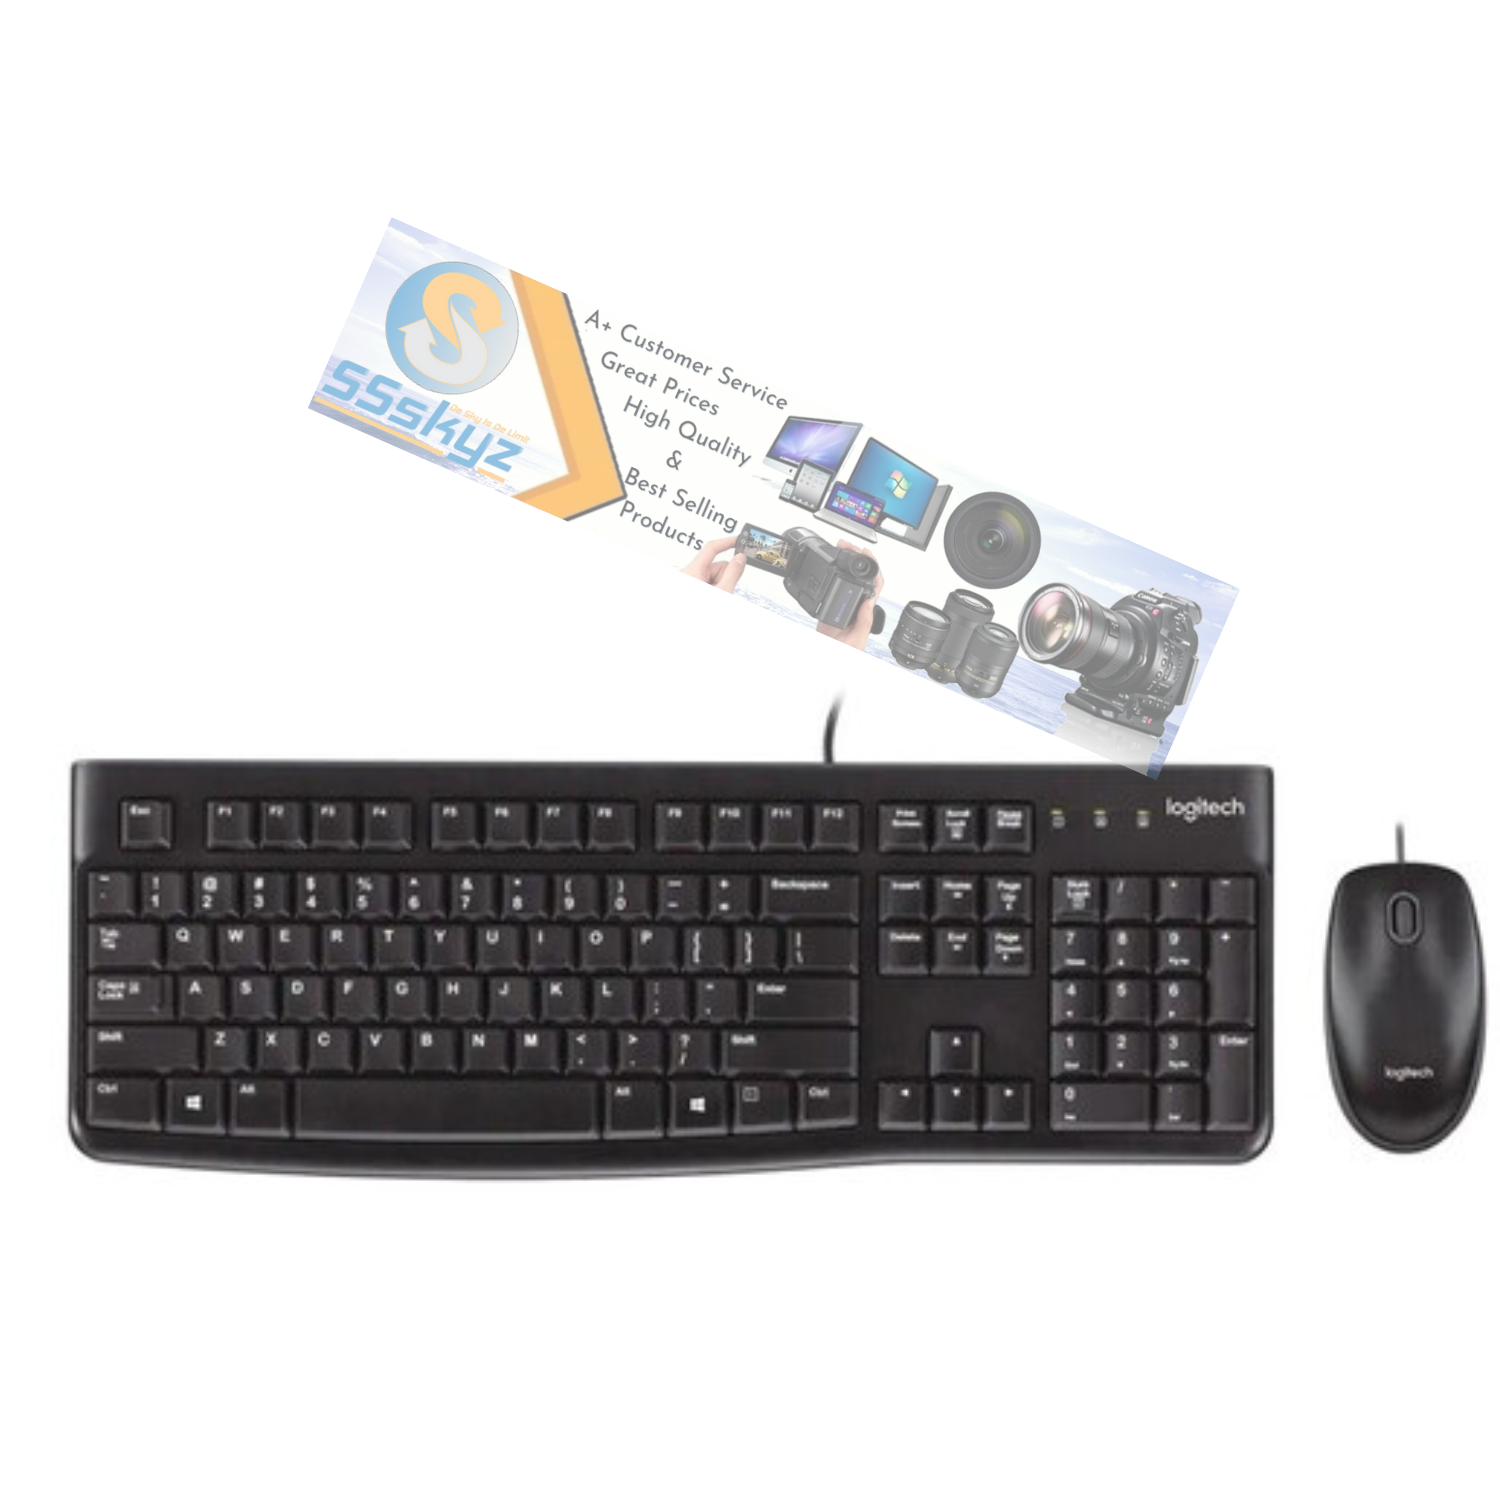 MK120 CORDED KEYBOARD AND MOUSE COMBO